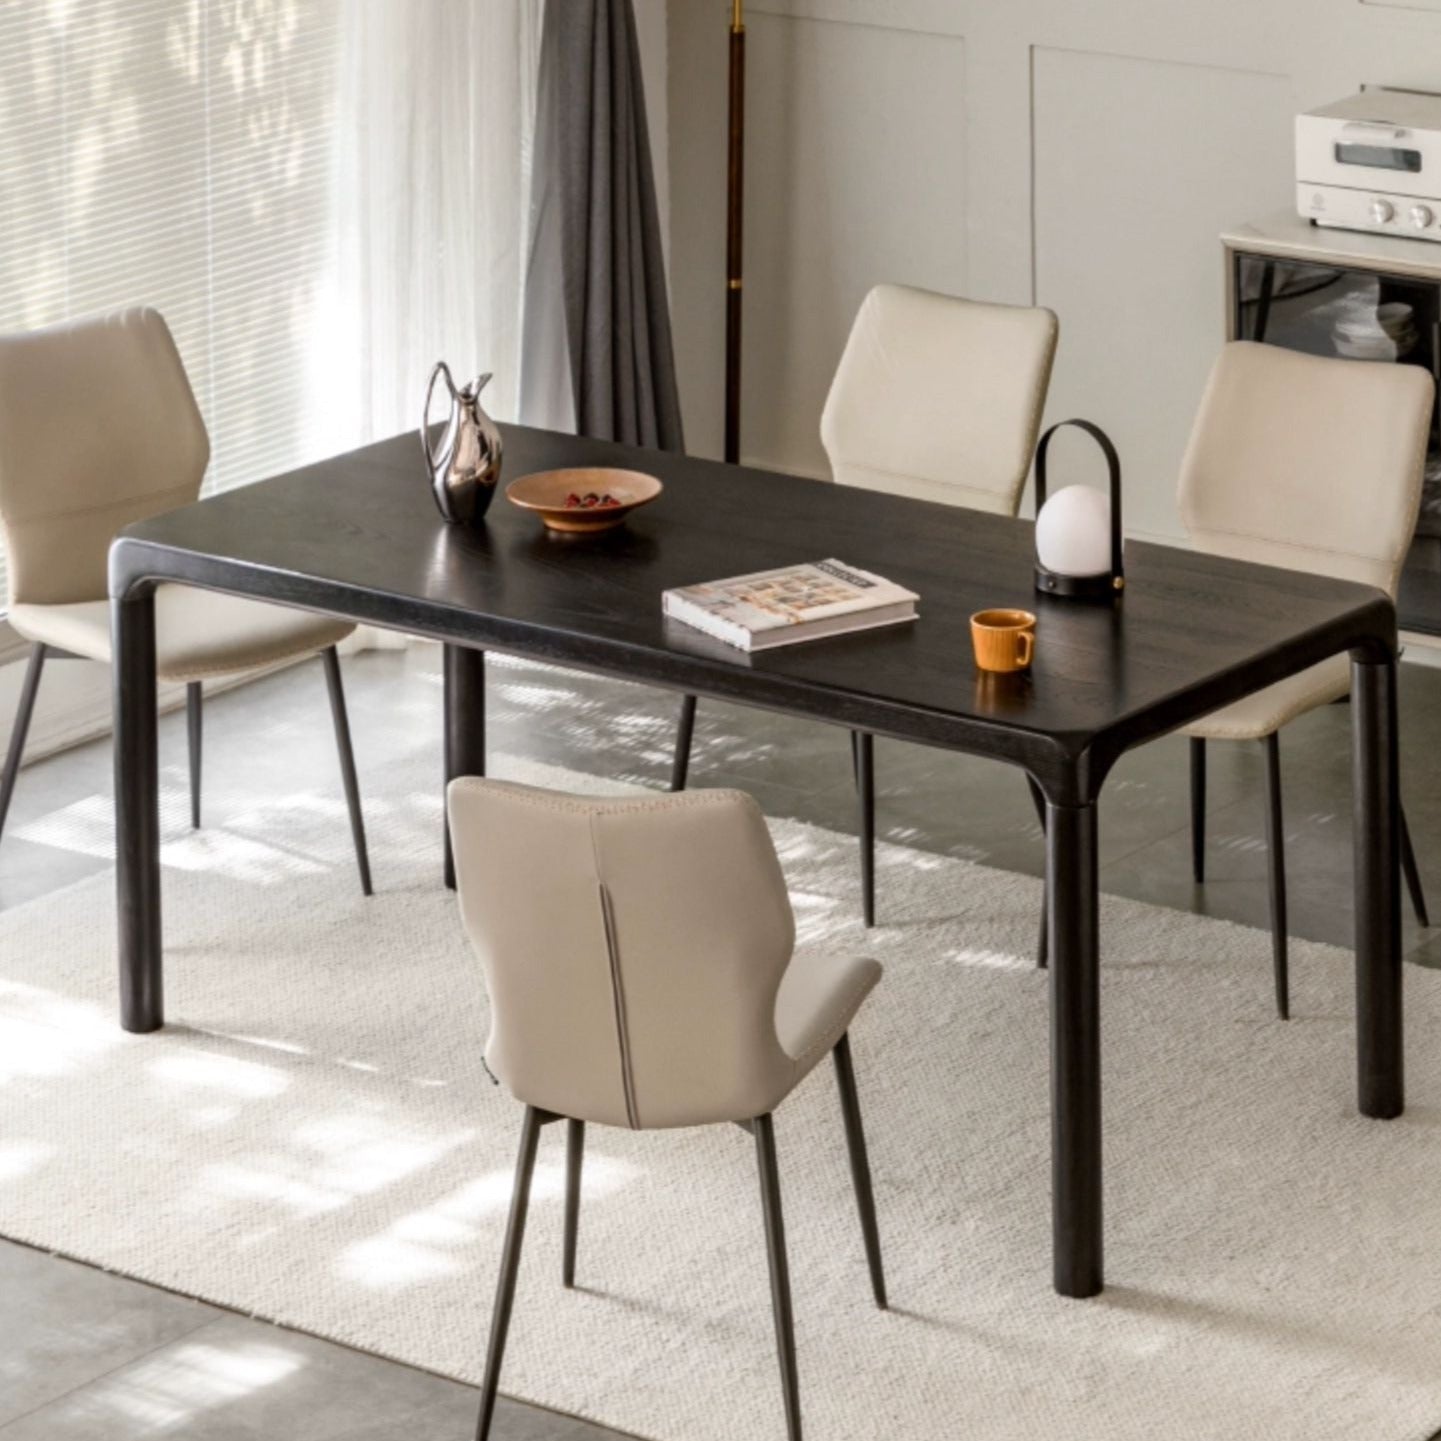 Black Nordic Ash solid wood Dining table "